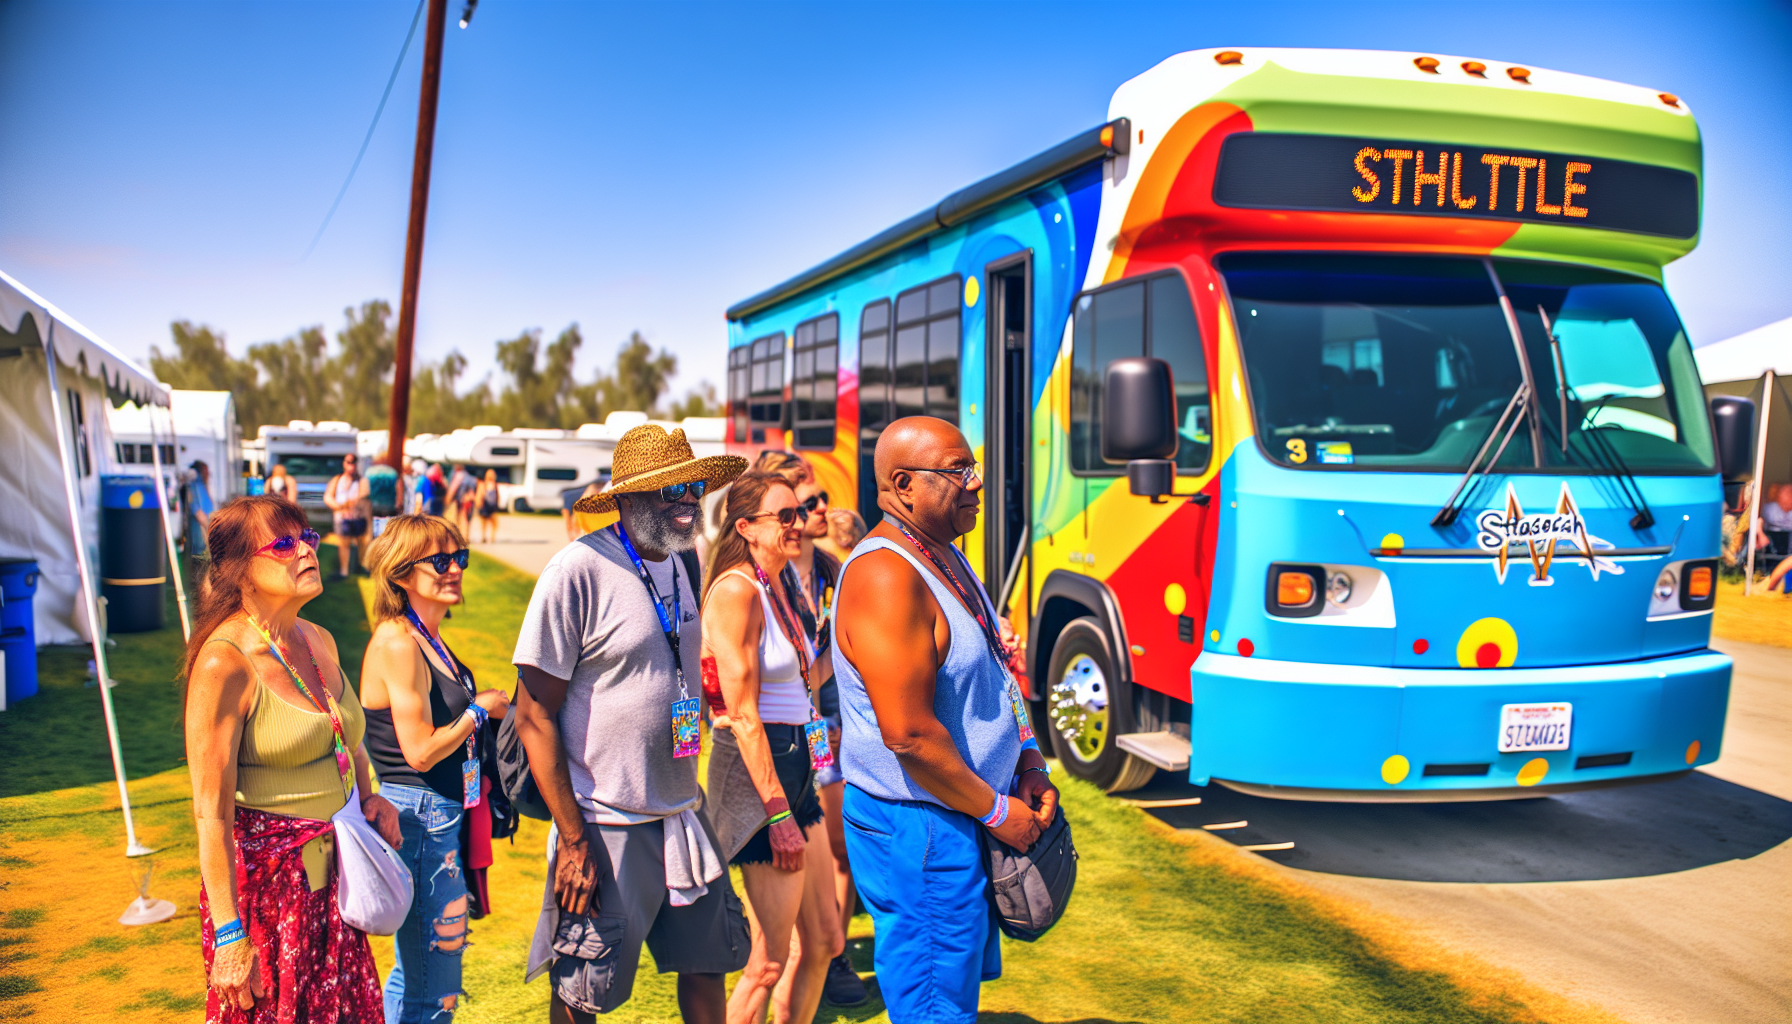 Shuttle service for RV campers at Stagecoach festival